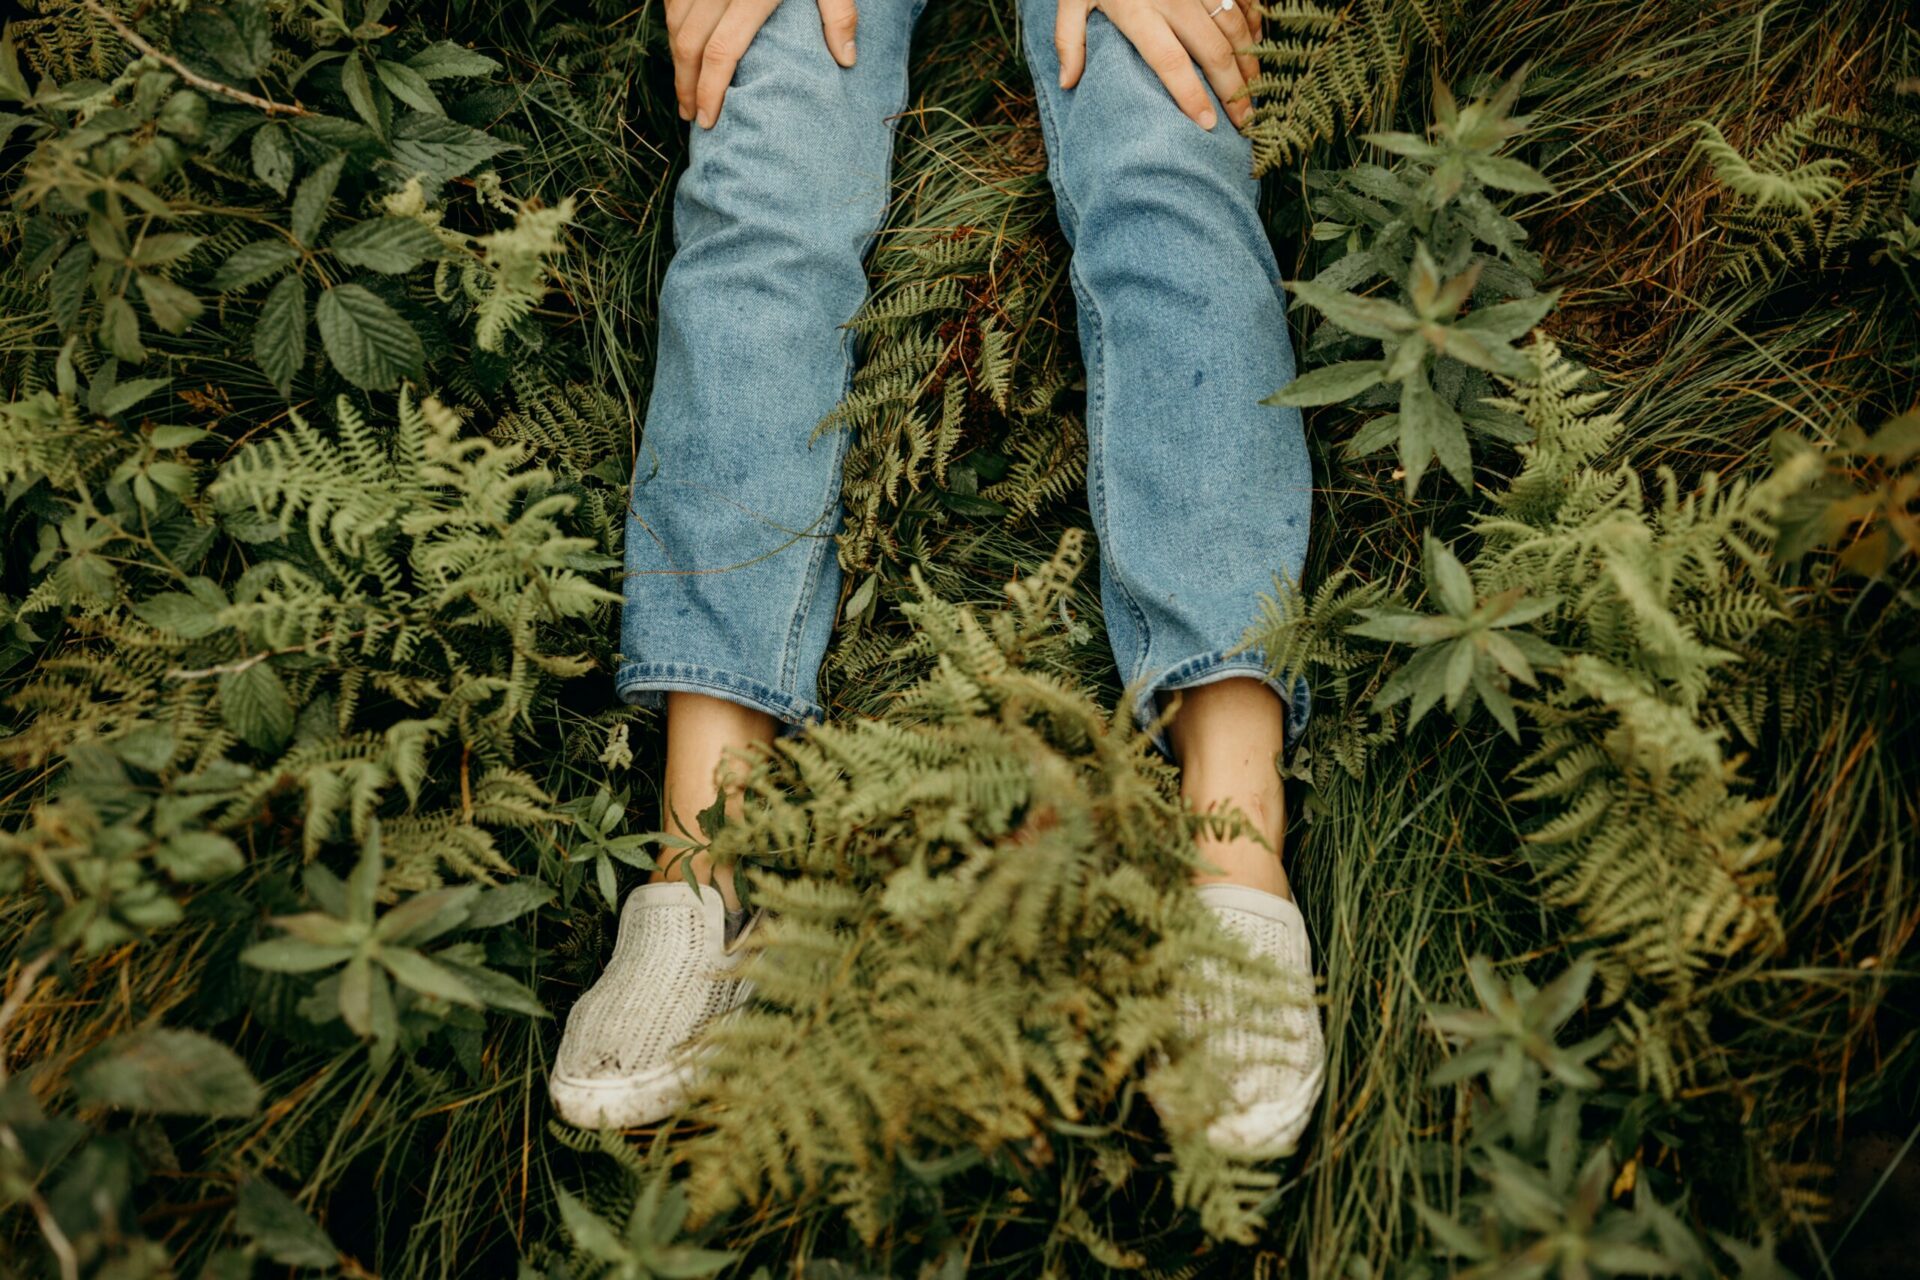 Green Denim Revival: How to Stretch Out Jeans Sustainably